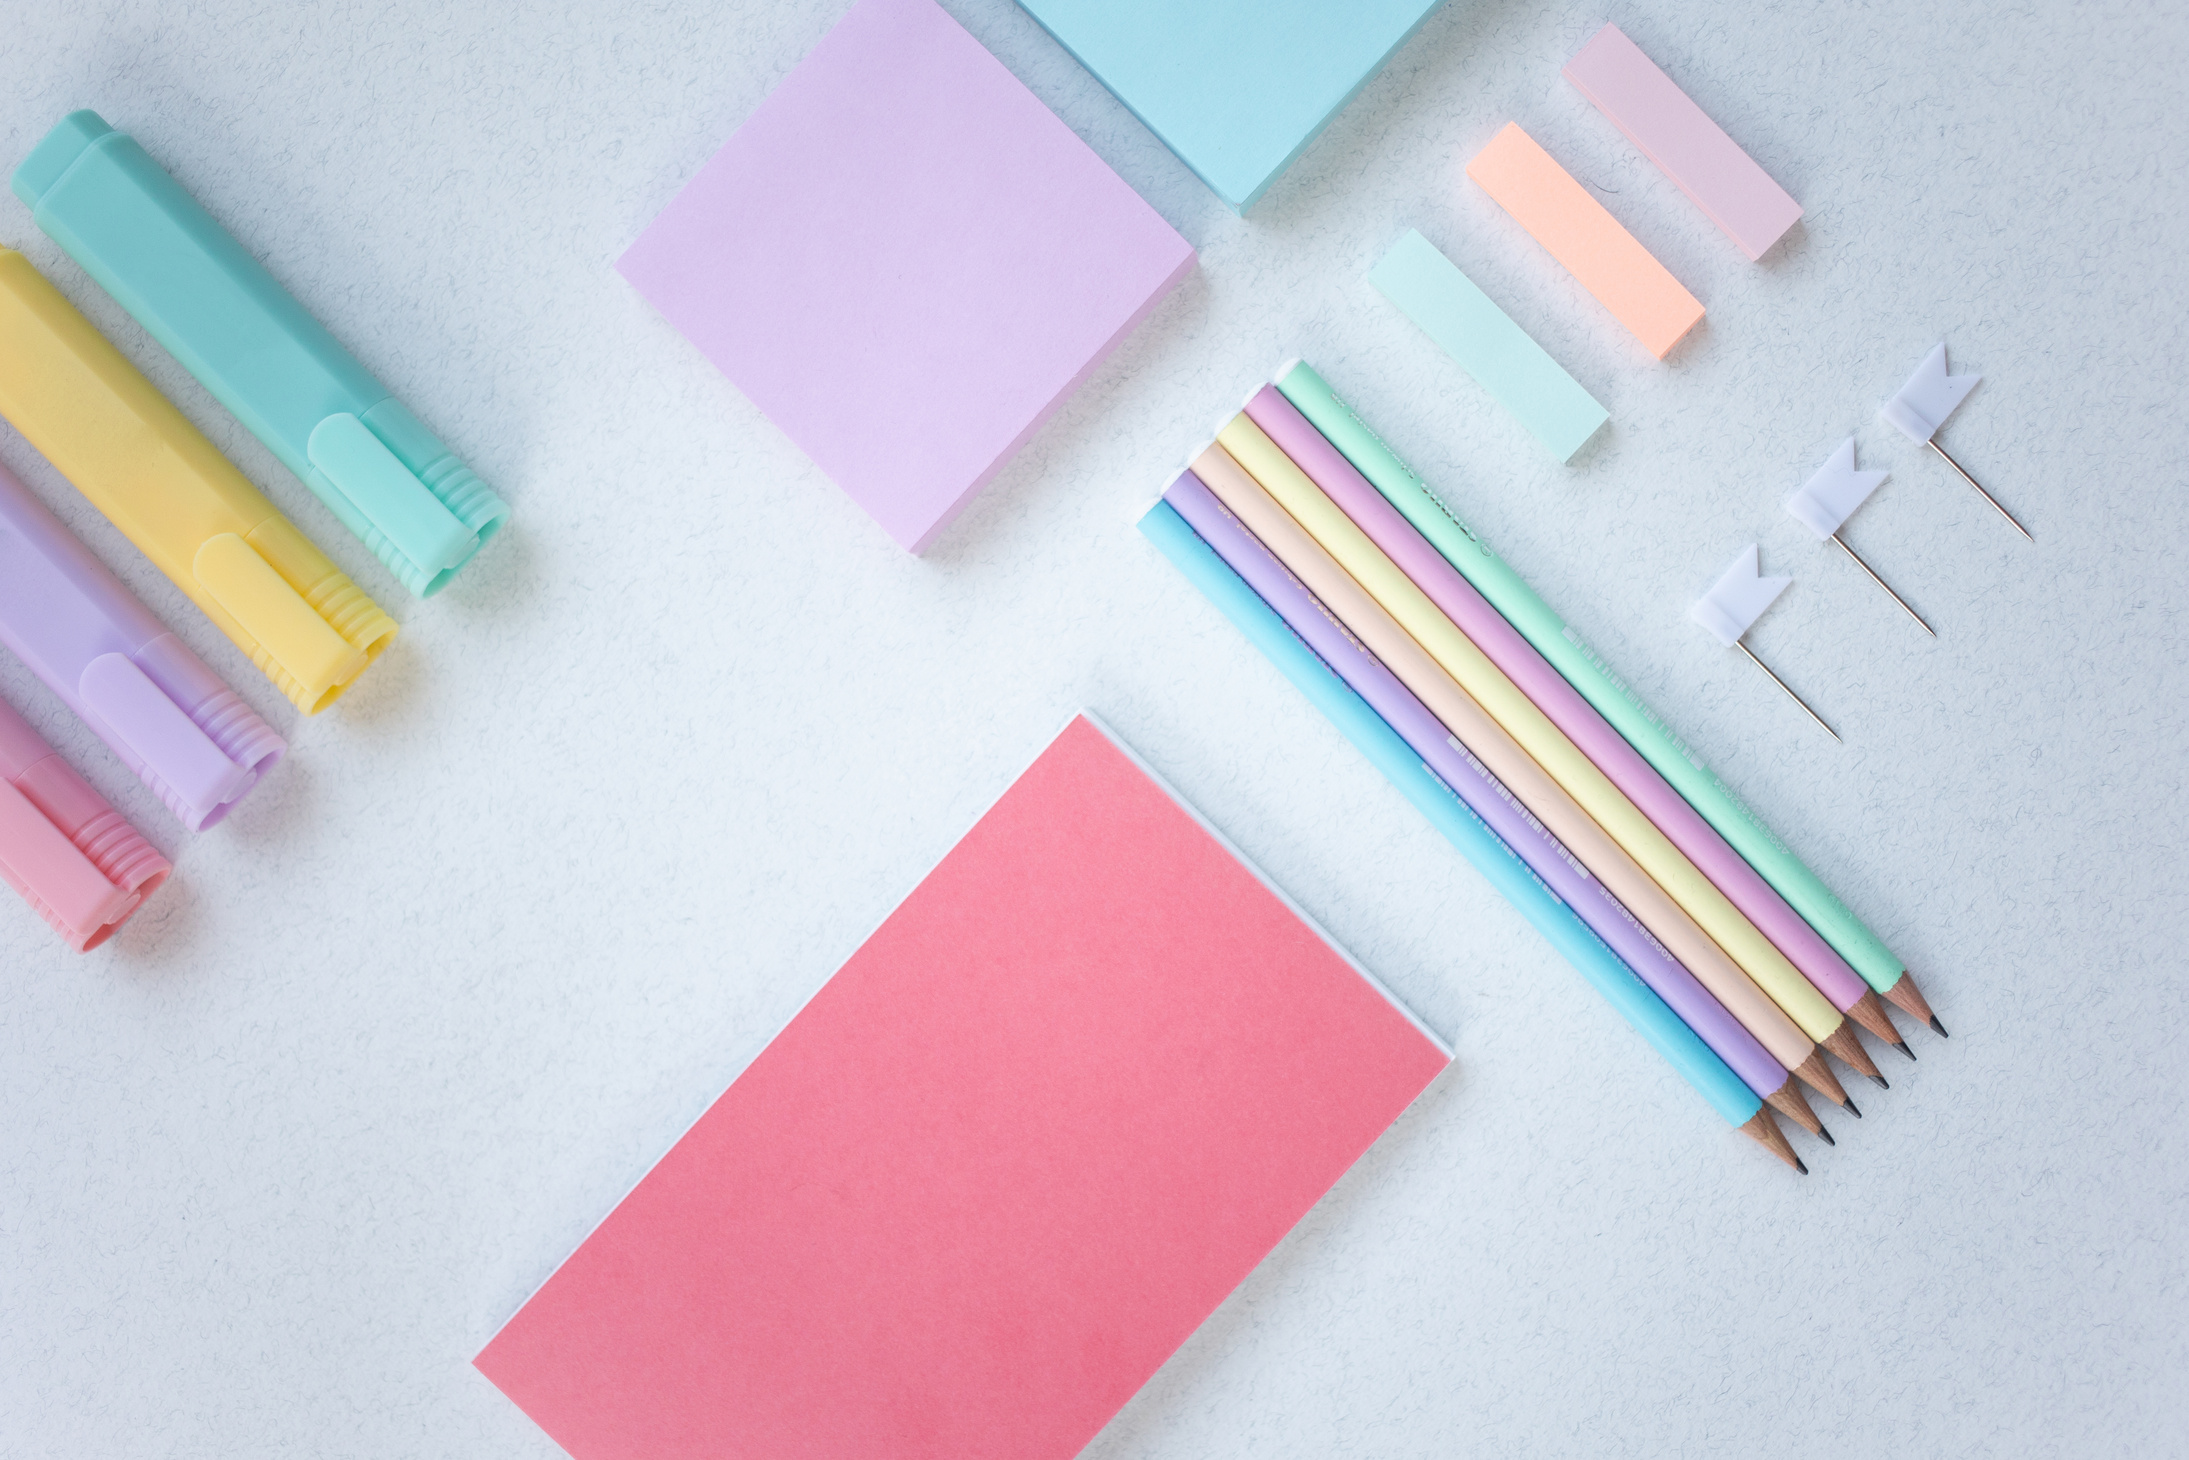 Organized Stationery Items on White Surface